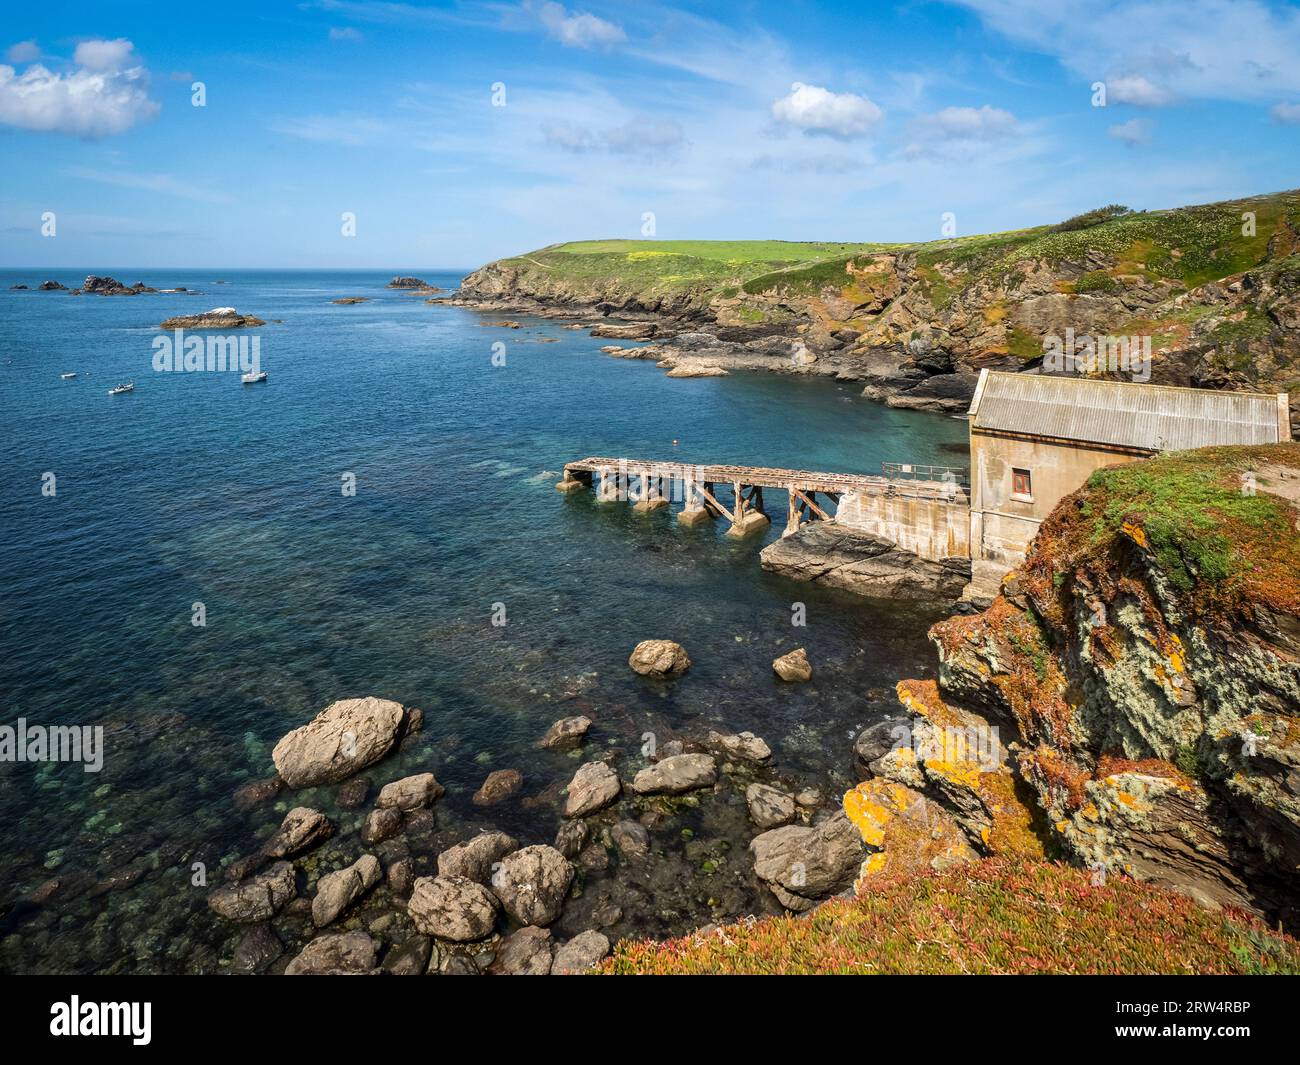 Boatshed and ramp at Lizard Point, Britain's most southerly point, Cornwall, UK. Stock Photo